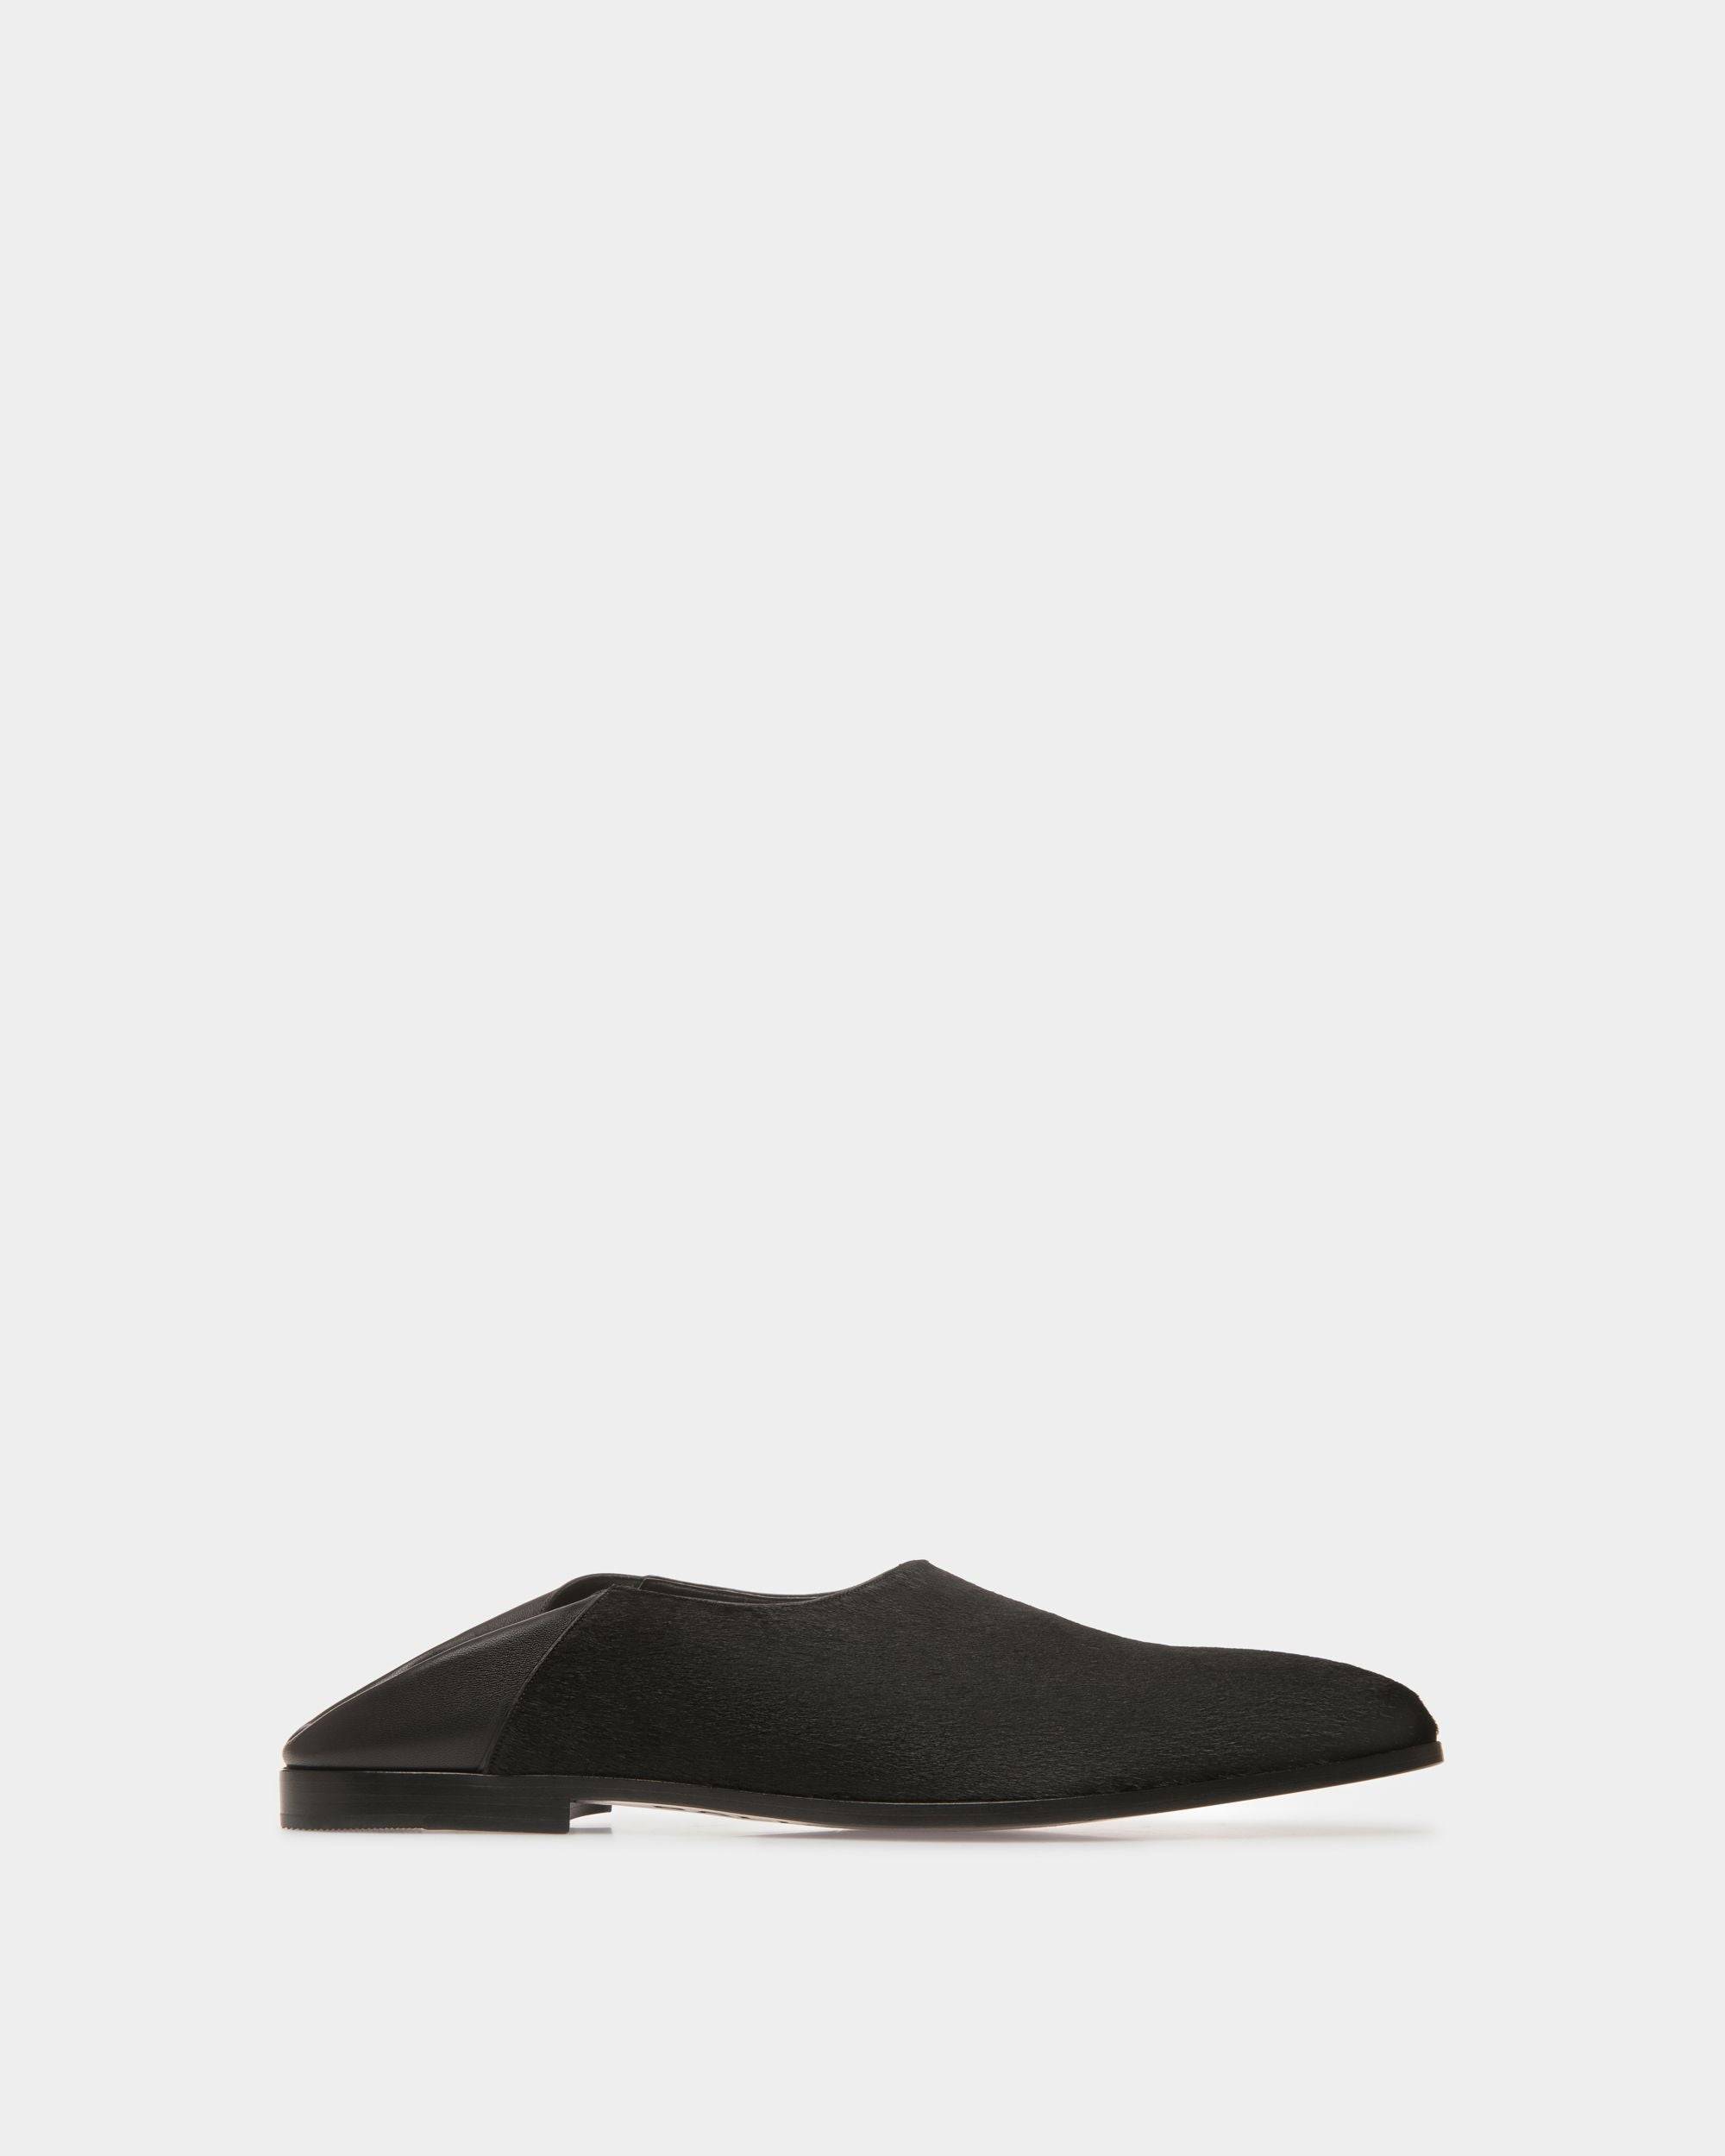 Men's Vegas Flat Loafers In Black Haircalf Leather | Bally | Still Life Side